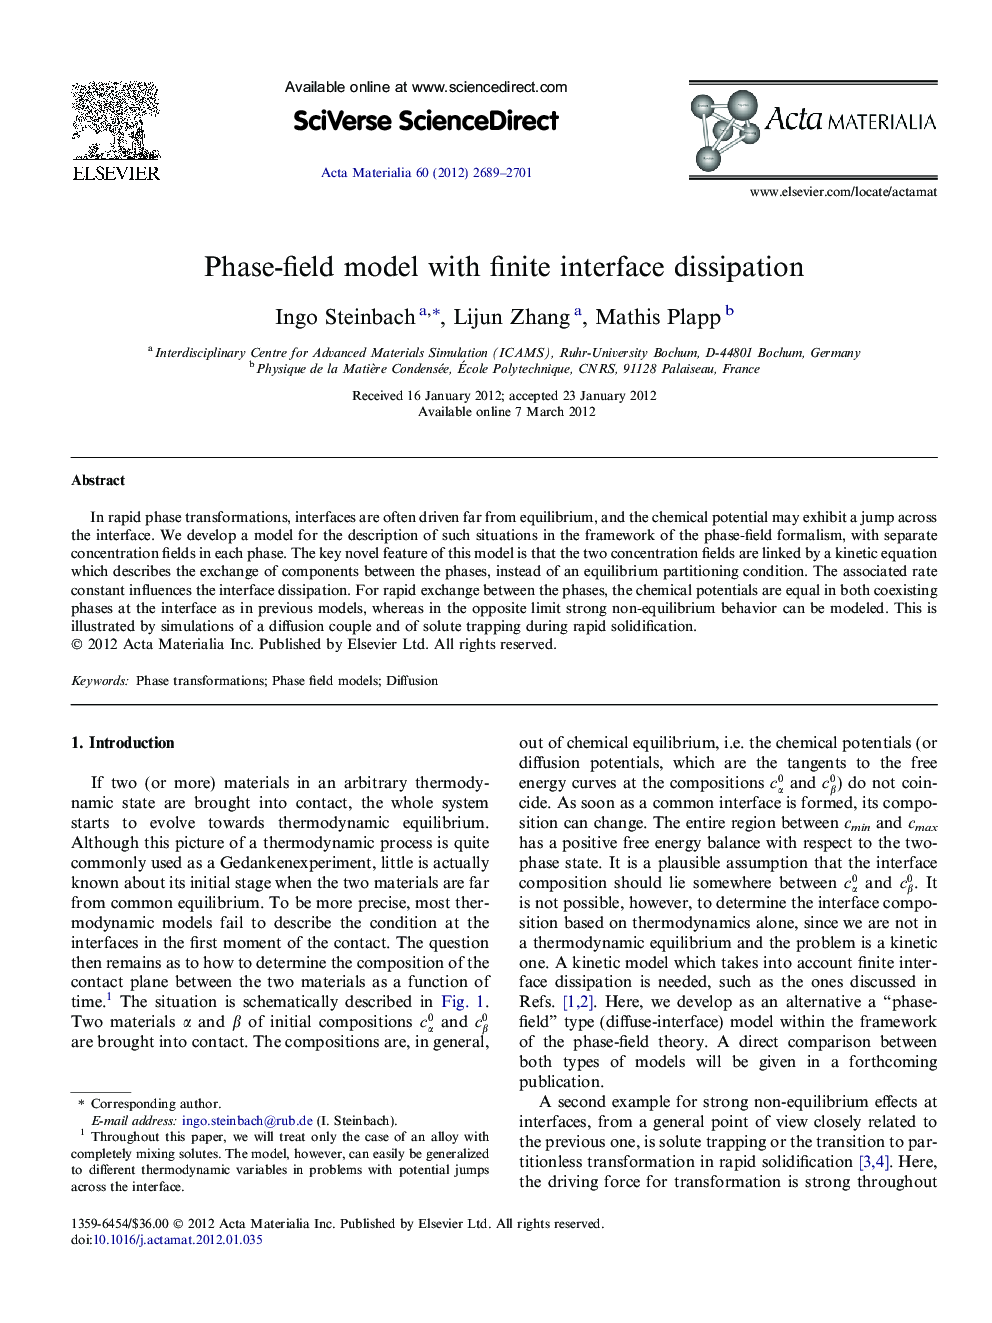 Phase-field model with finite interface dissipation